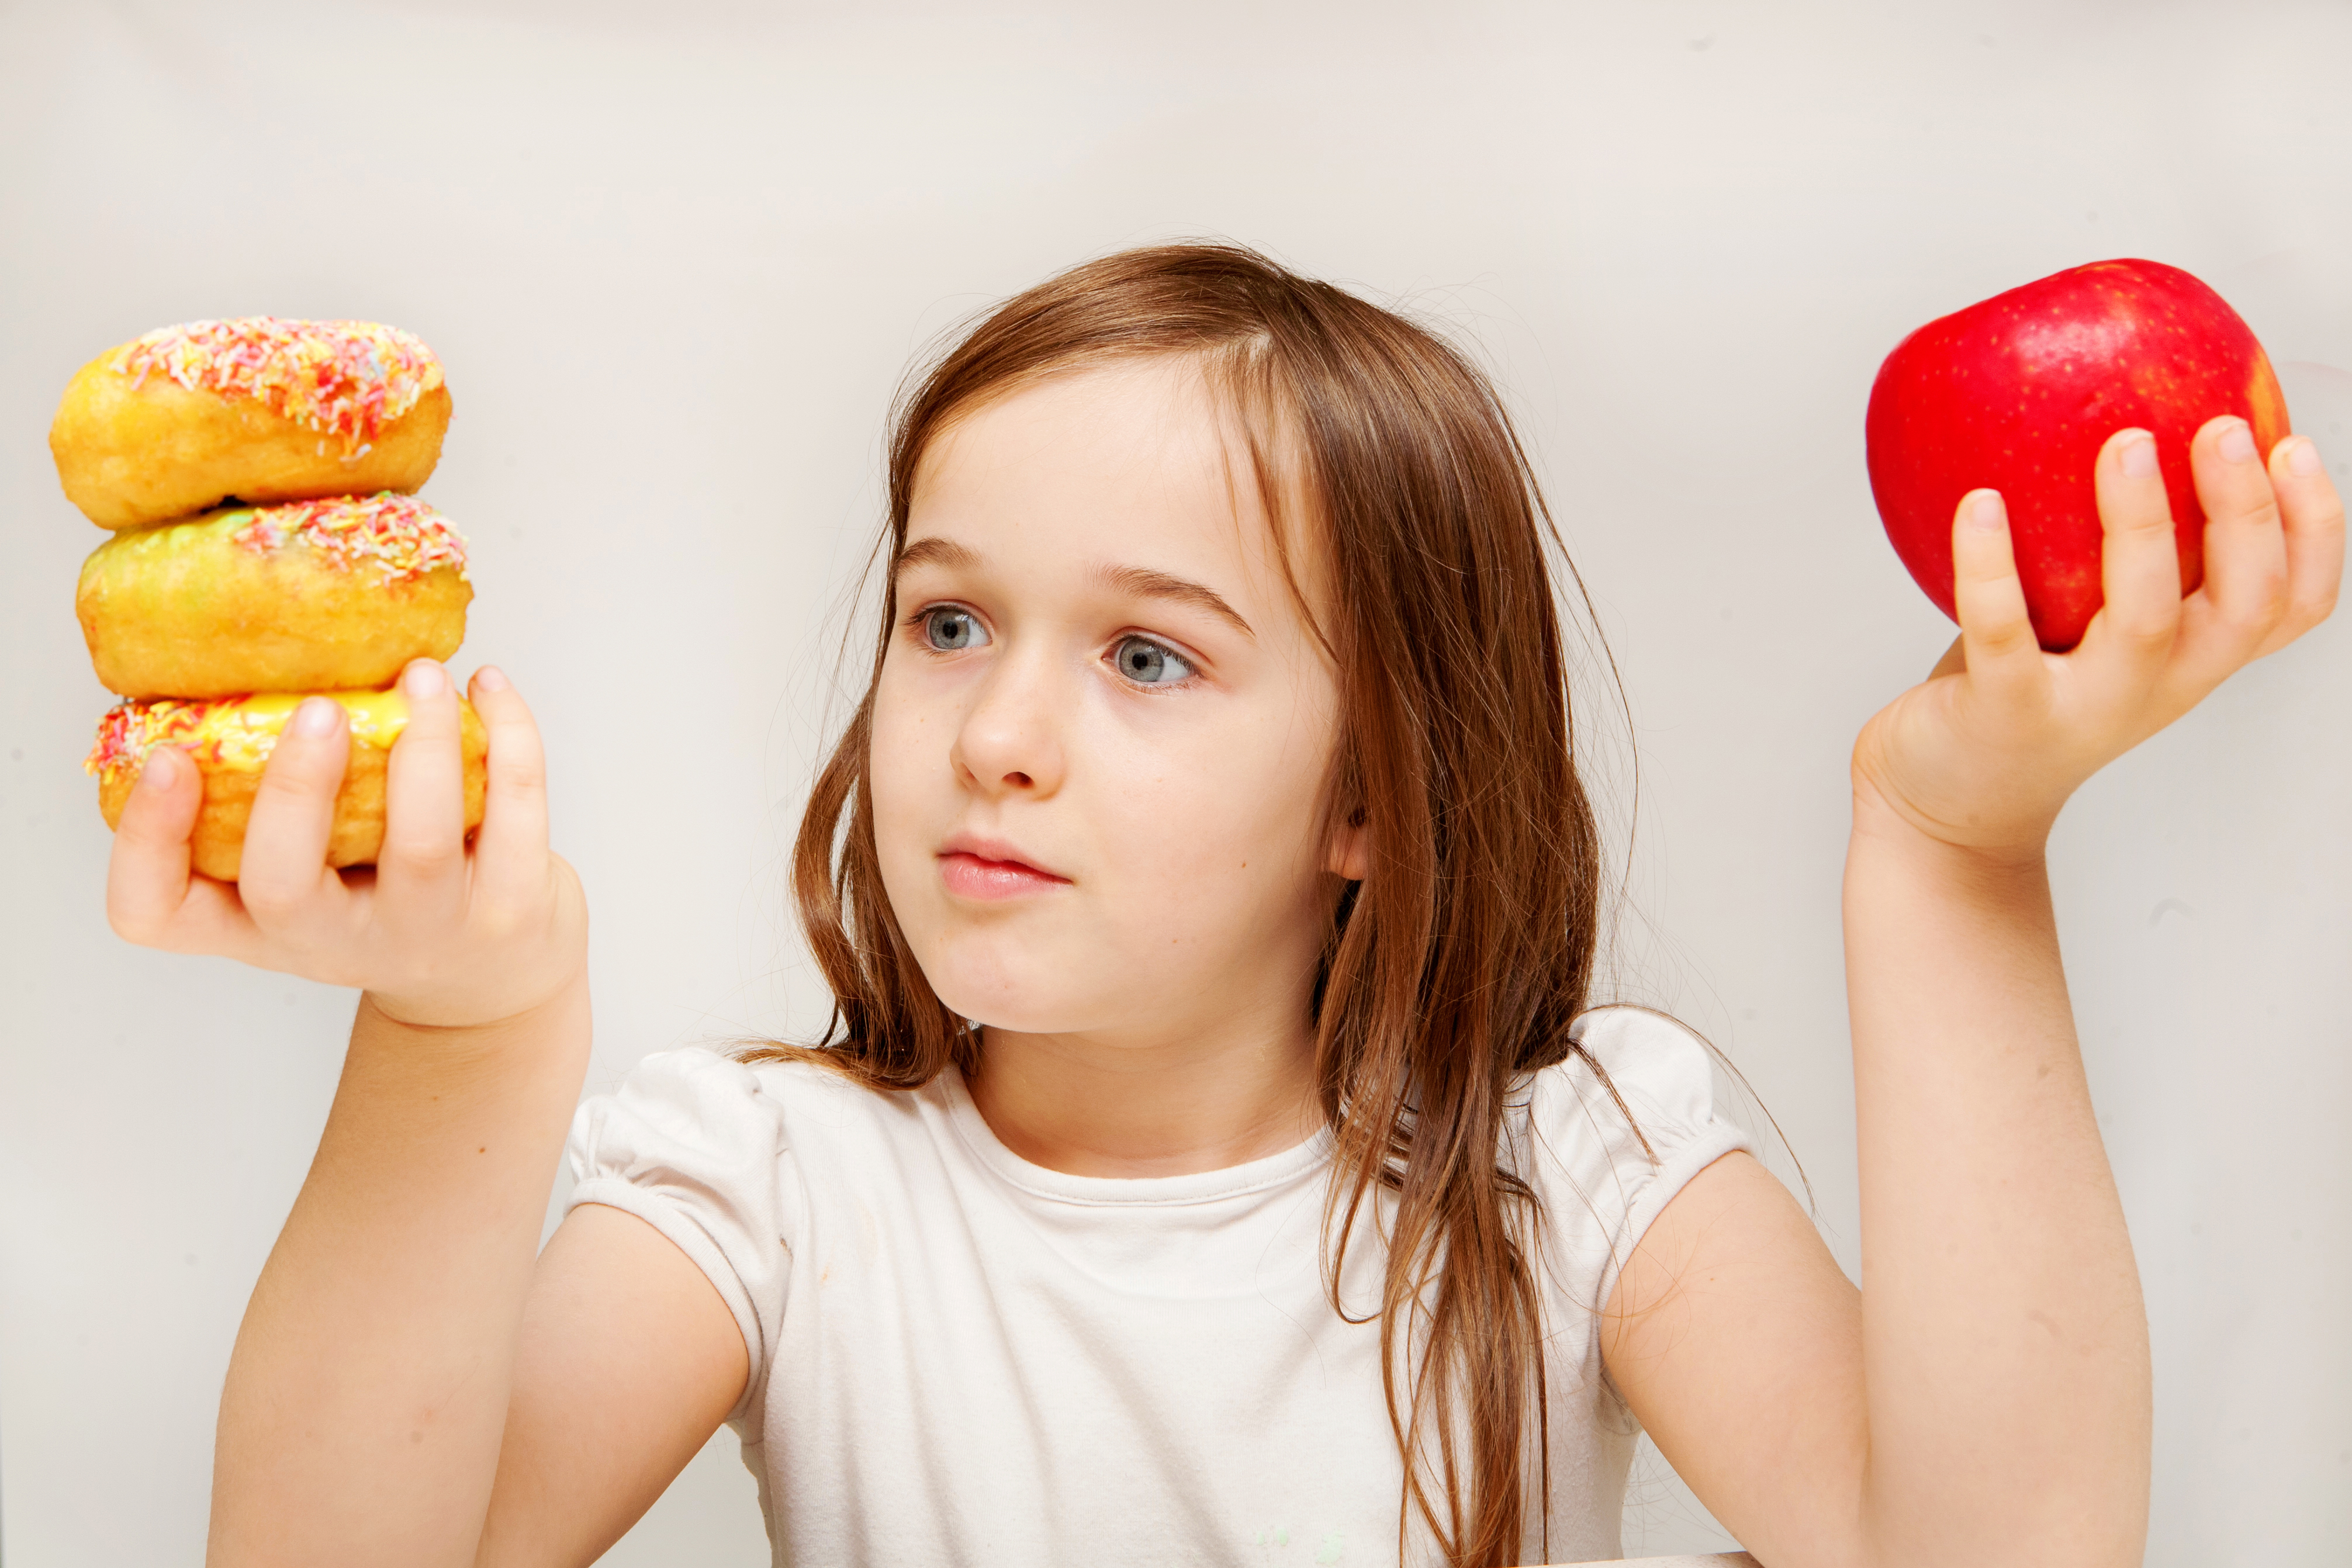 This photo depicts a young girl making decisions betwen healthy y food and unhealthy food.